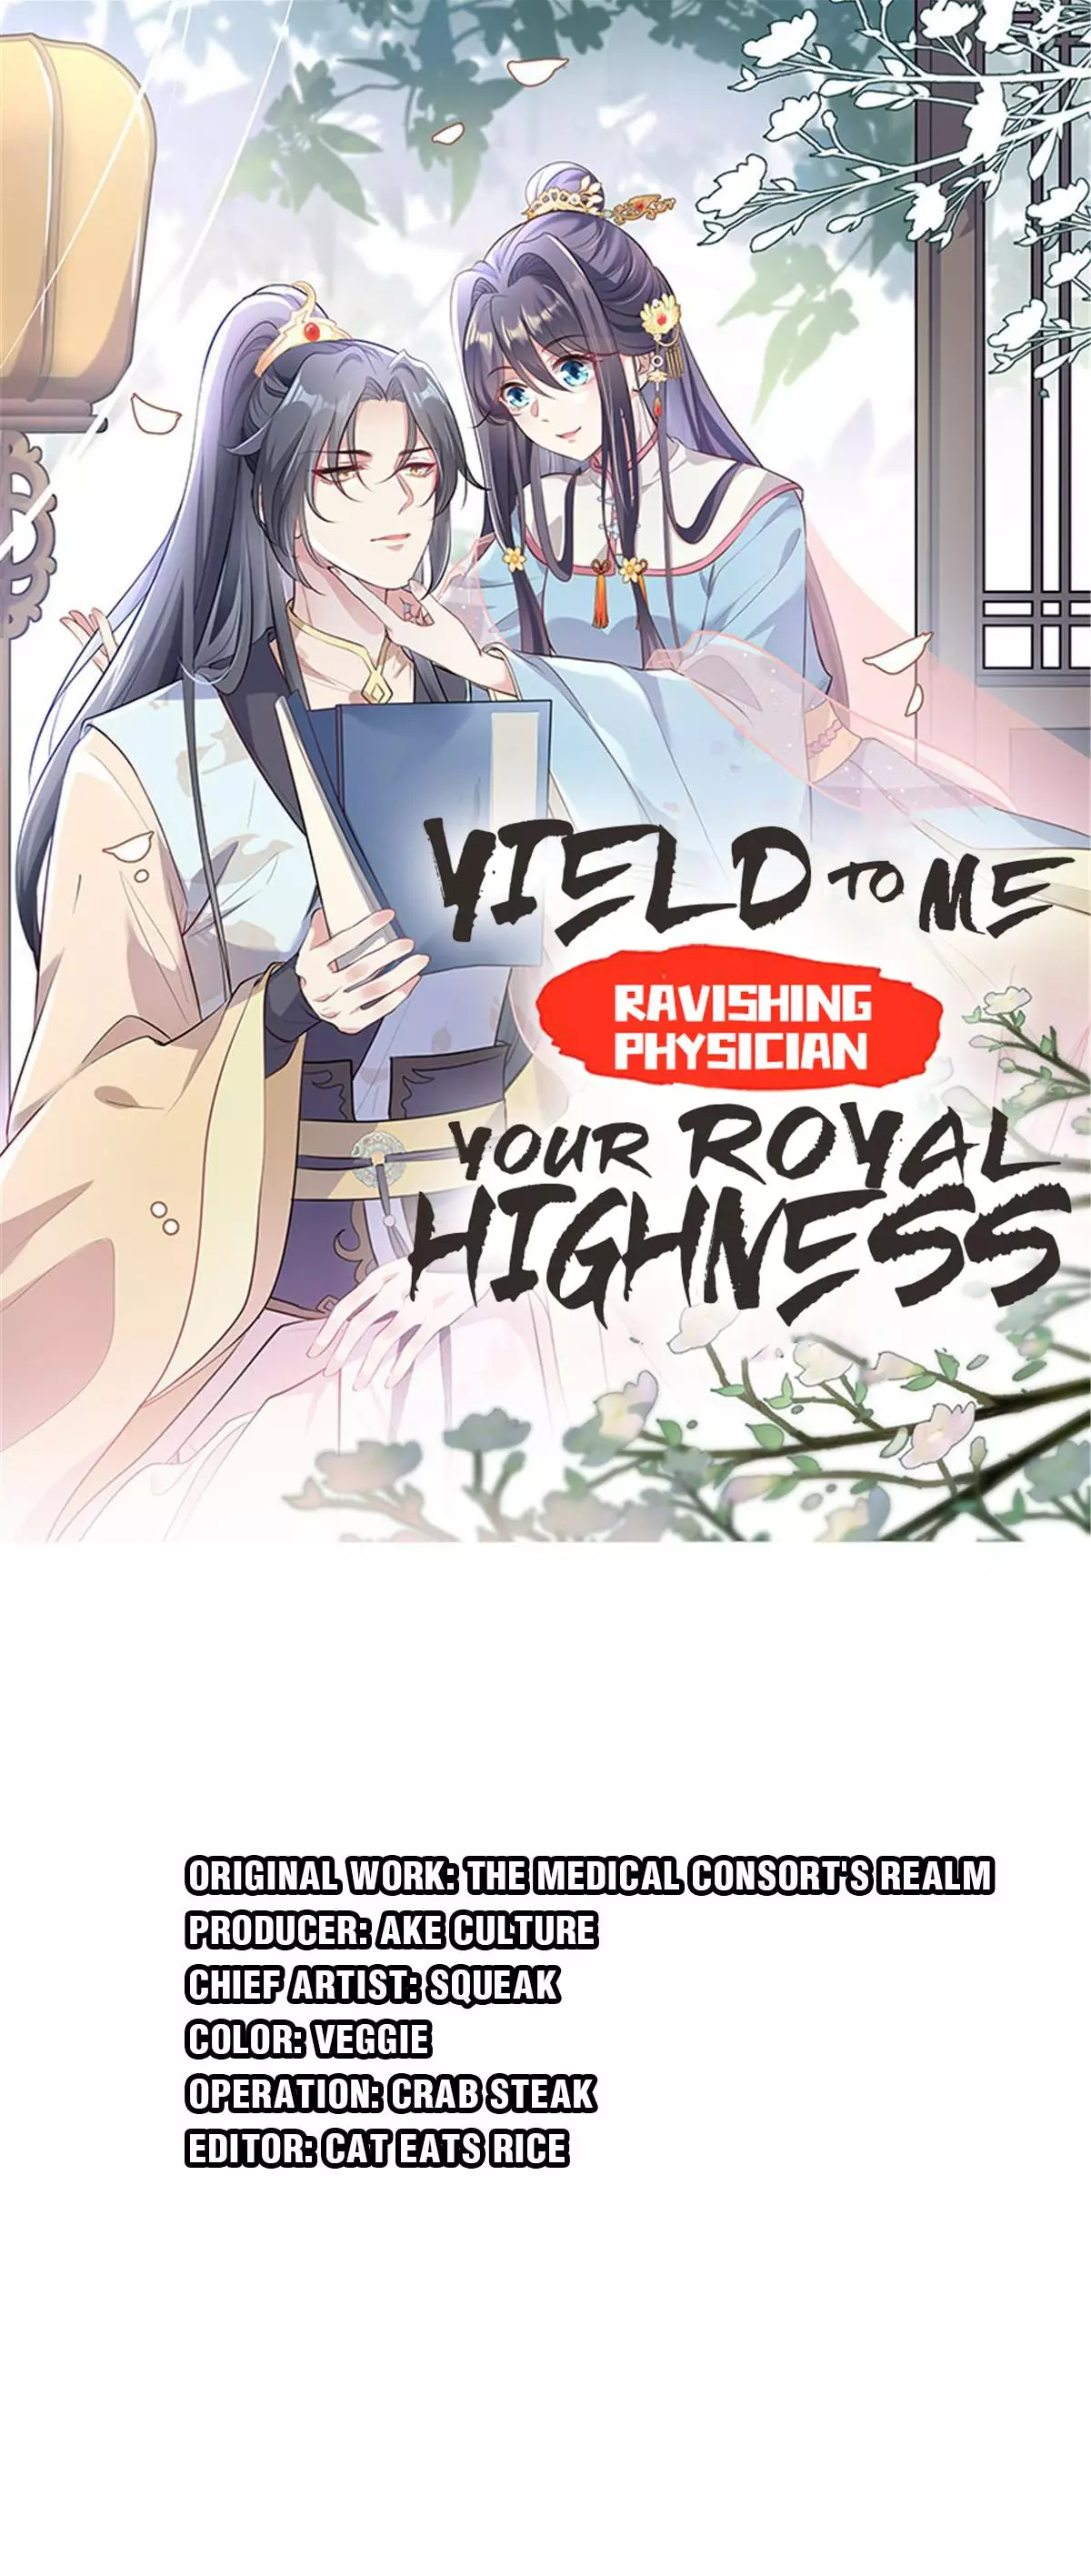 Ravishing Physician: Yield To Me, Your Royal Highness - 36 page 1-94ac6d55